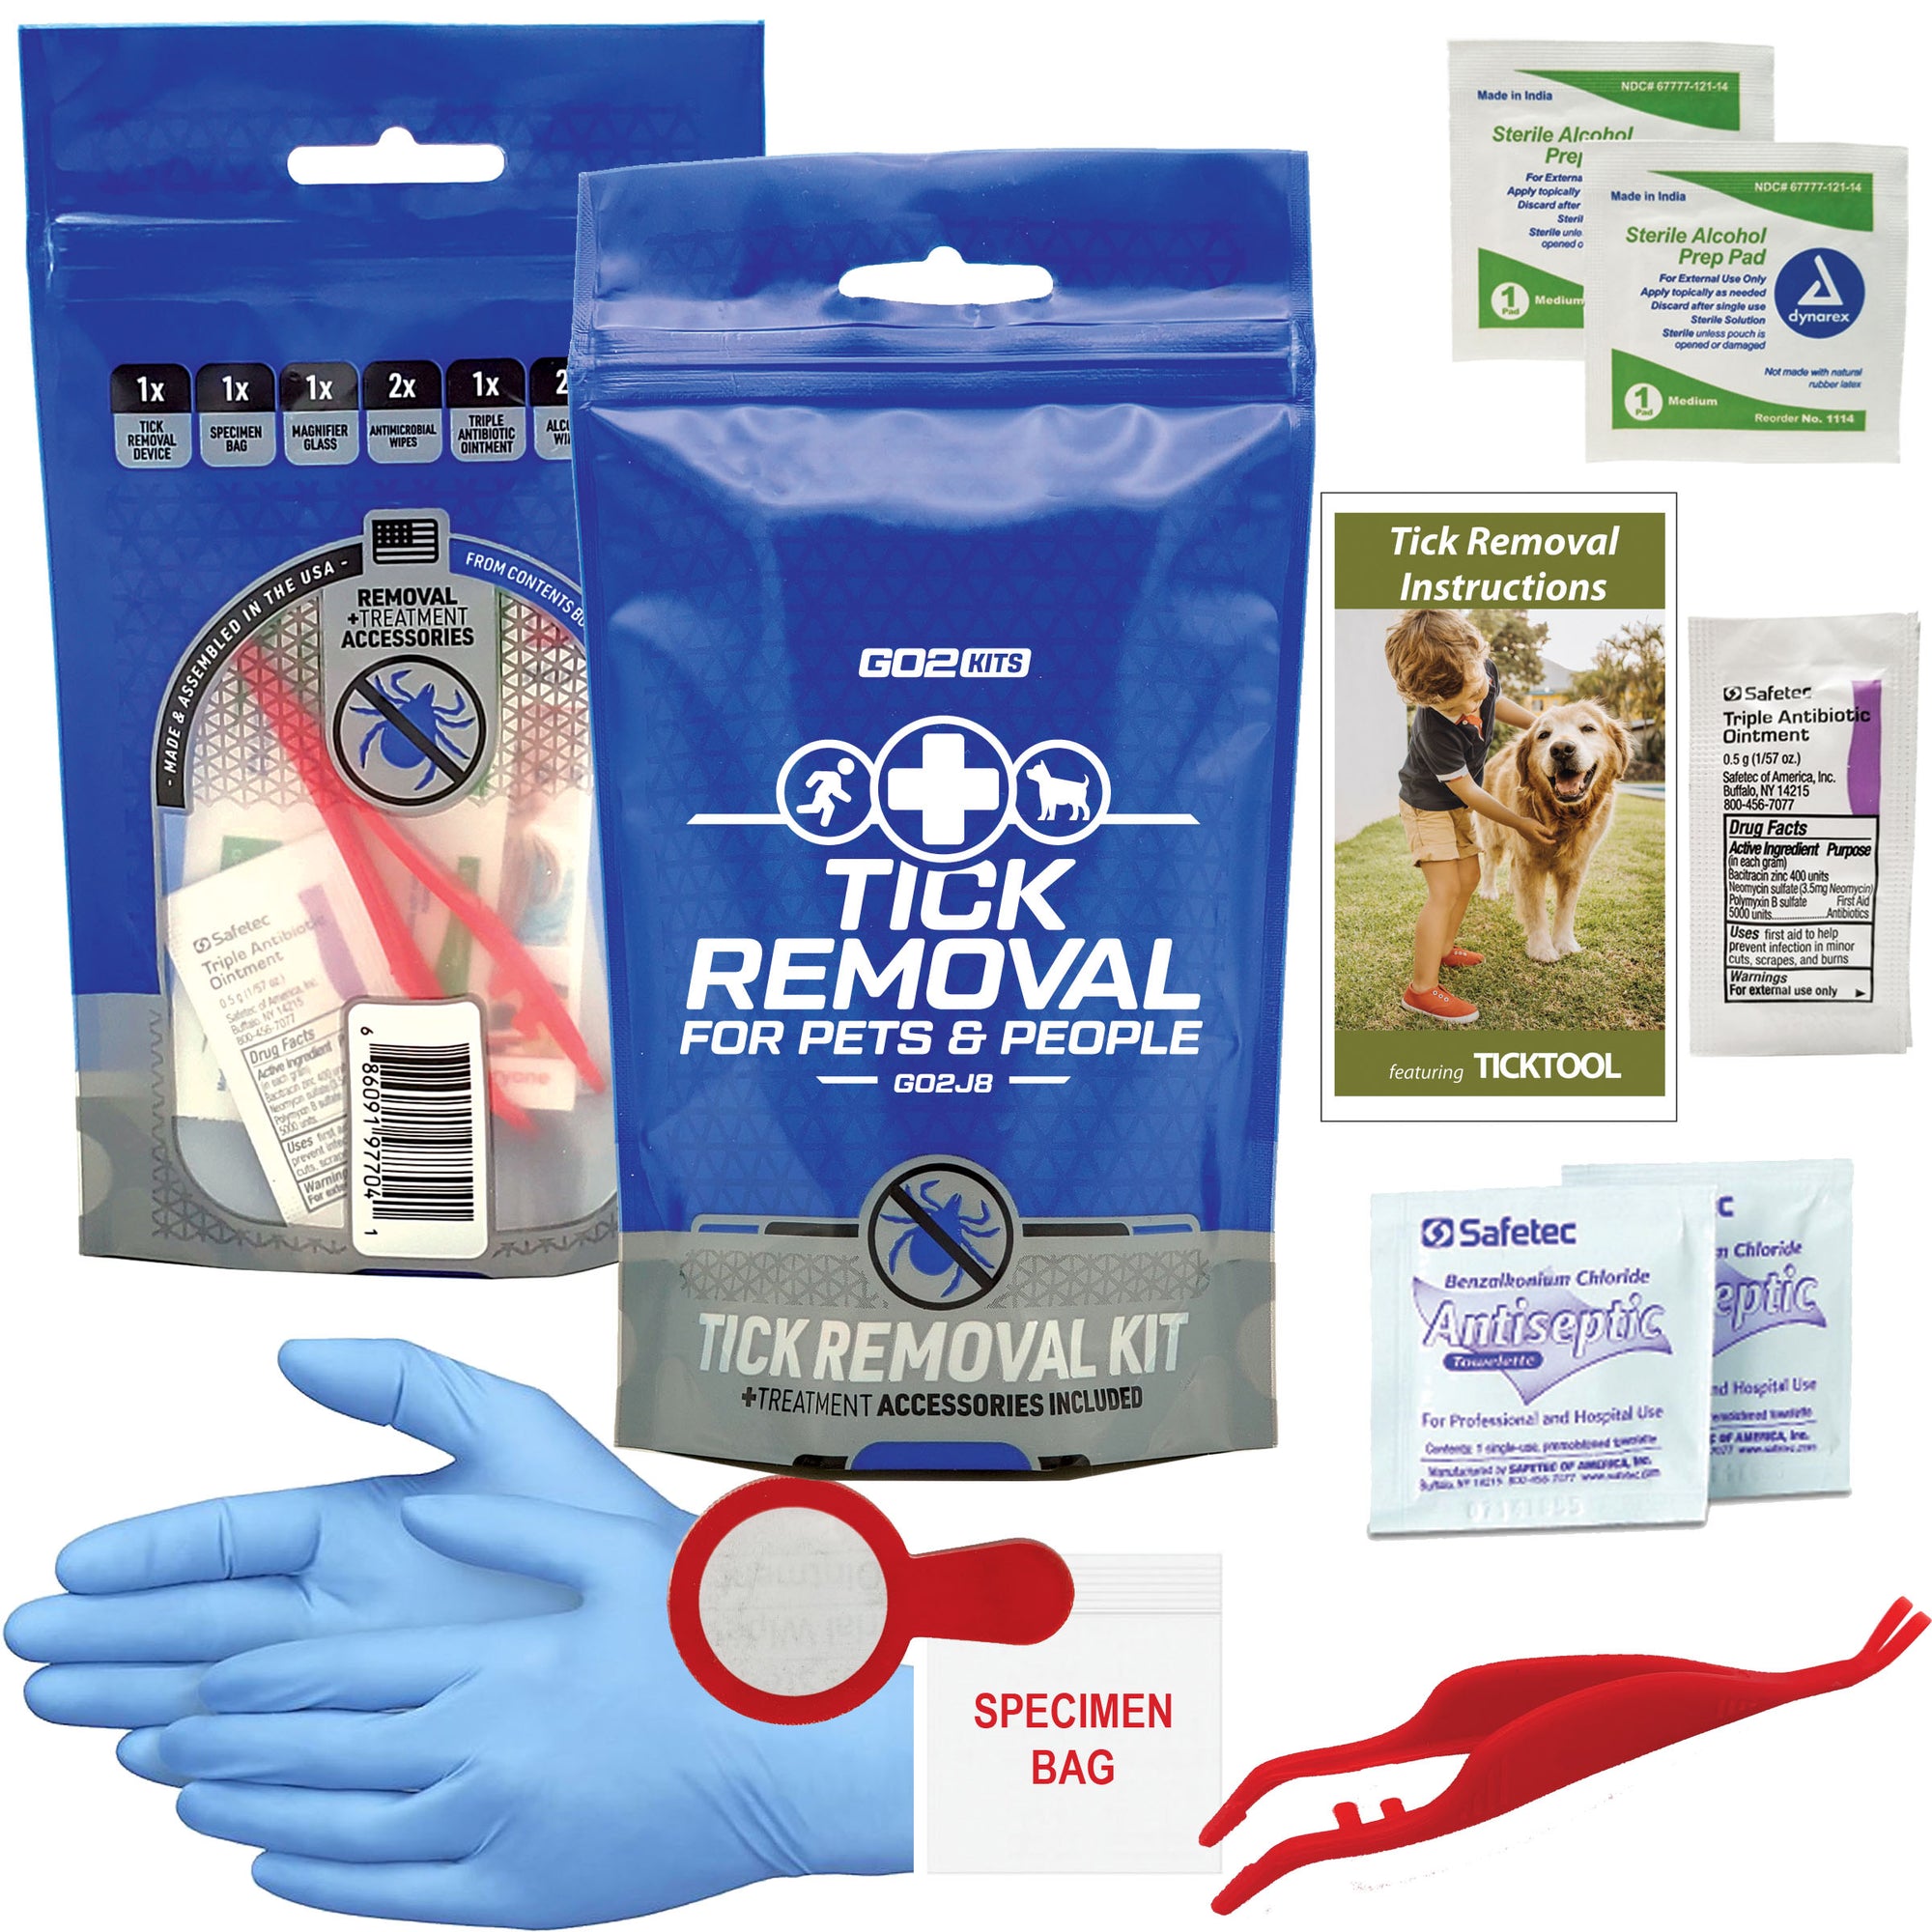 Tick Removal Kit for Pets & People (GO2J8)